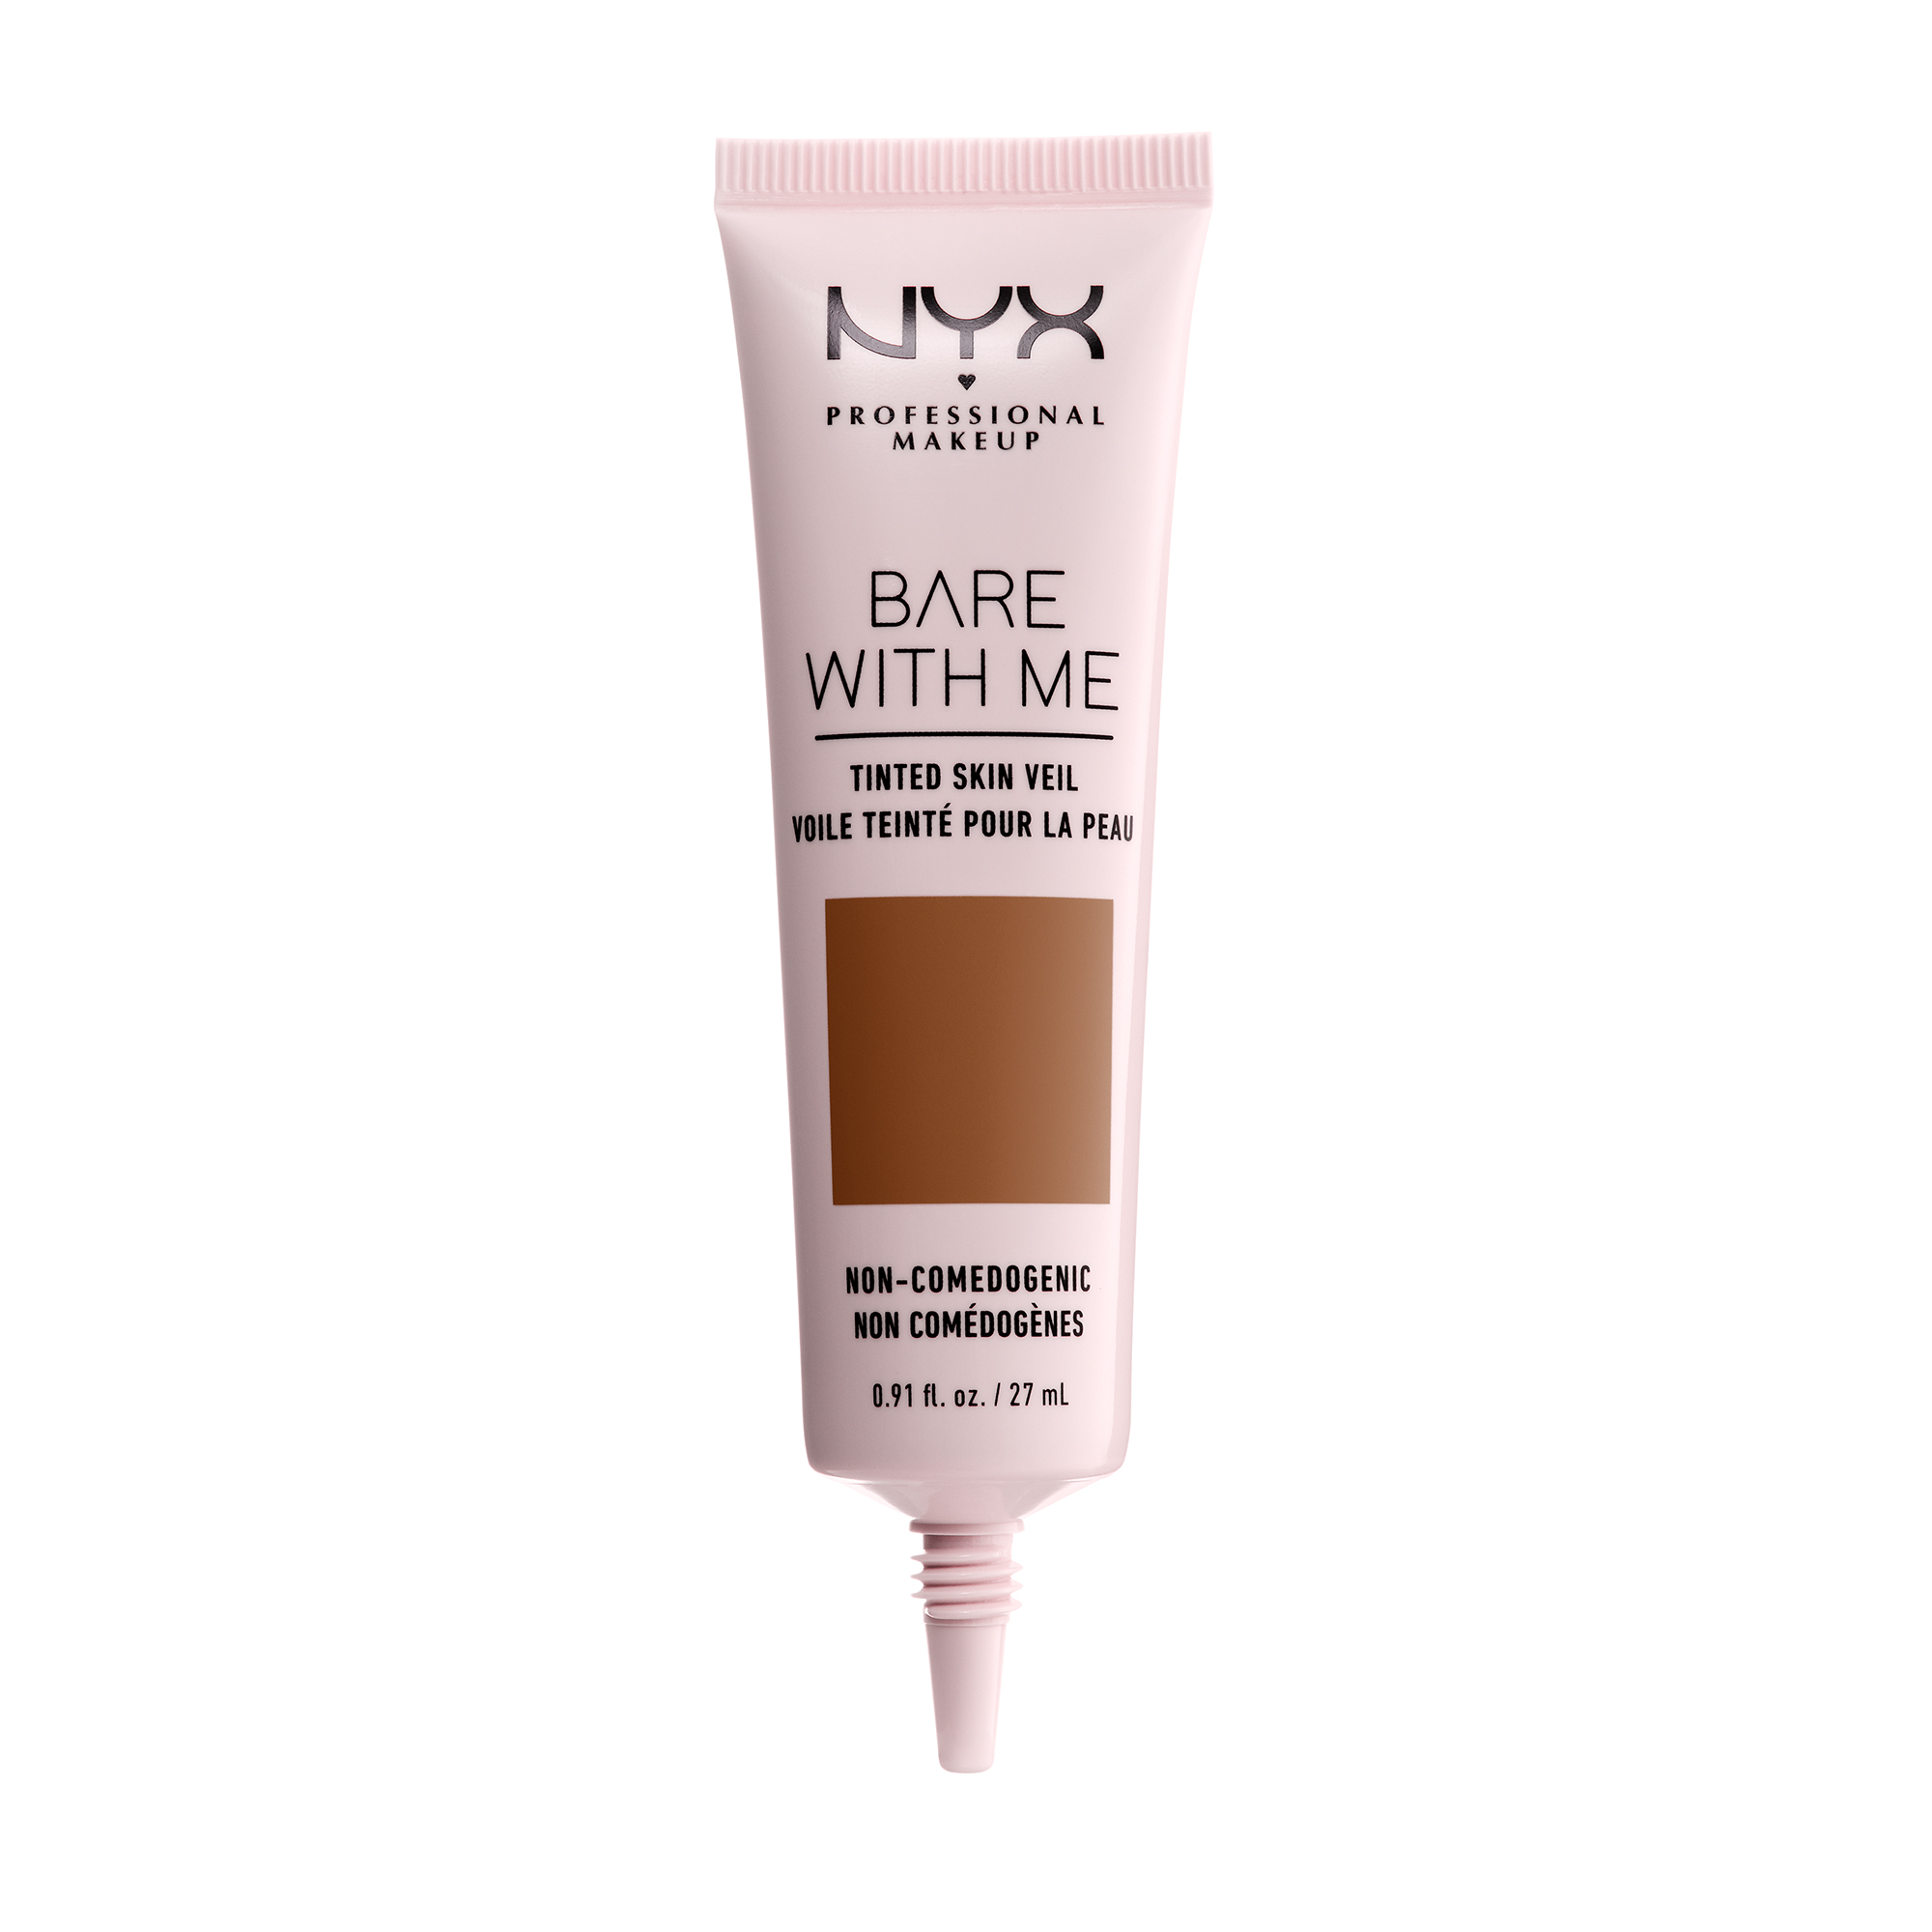 NYX Professional Makeup Bare With Me Tinted Skin Veil, Lightweight BB Cream, Deep Mocha - image 3 of 7